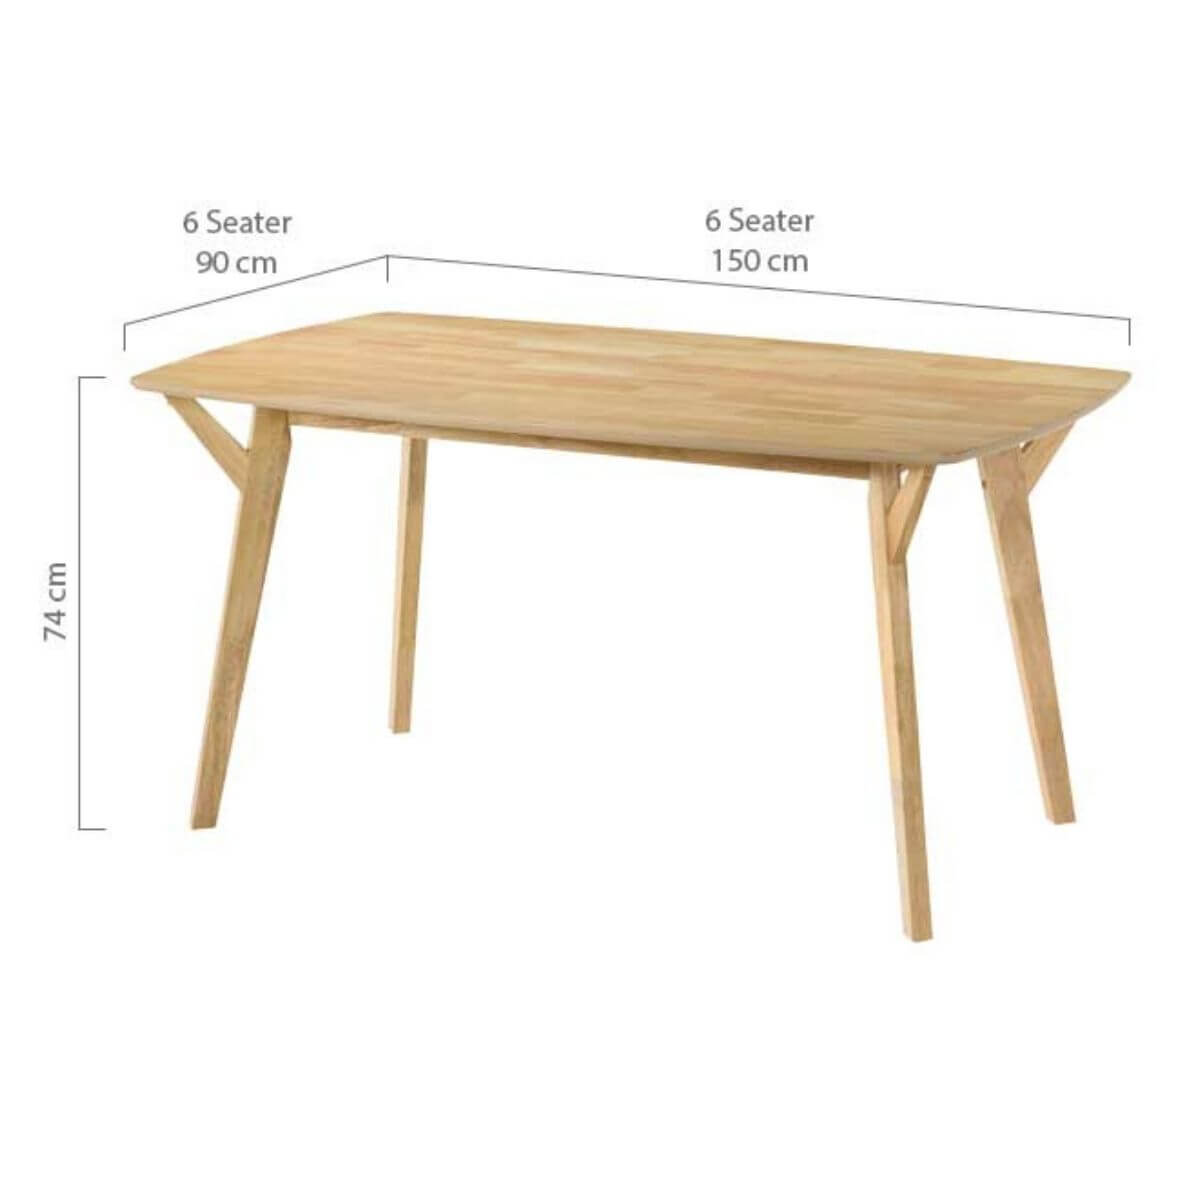 Gather Around an Elegant Oval Dining Table - 6-Seater in Natural Color-Upinteriors